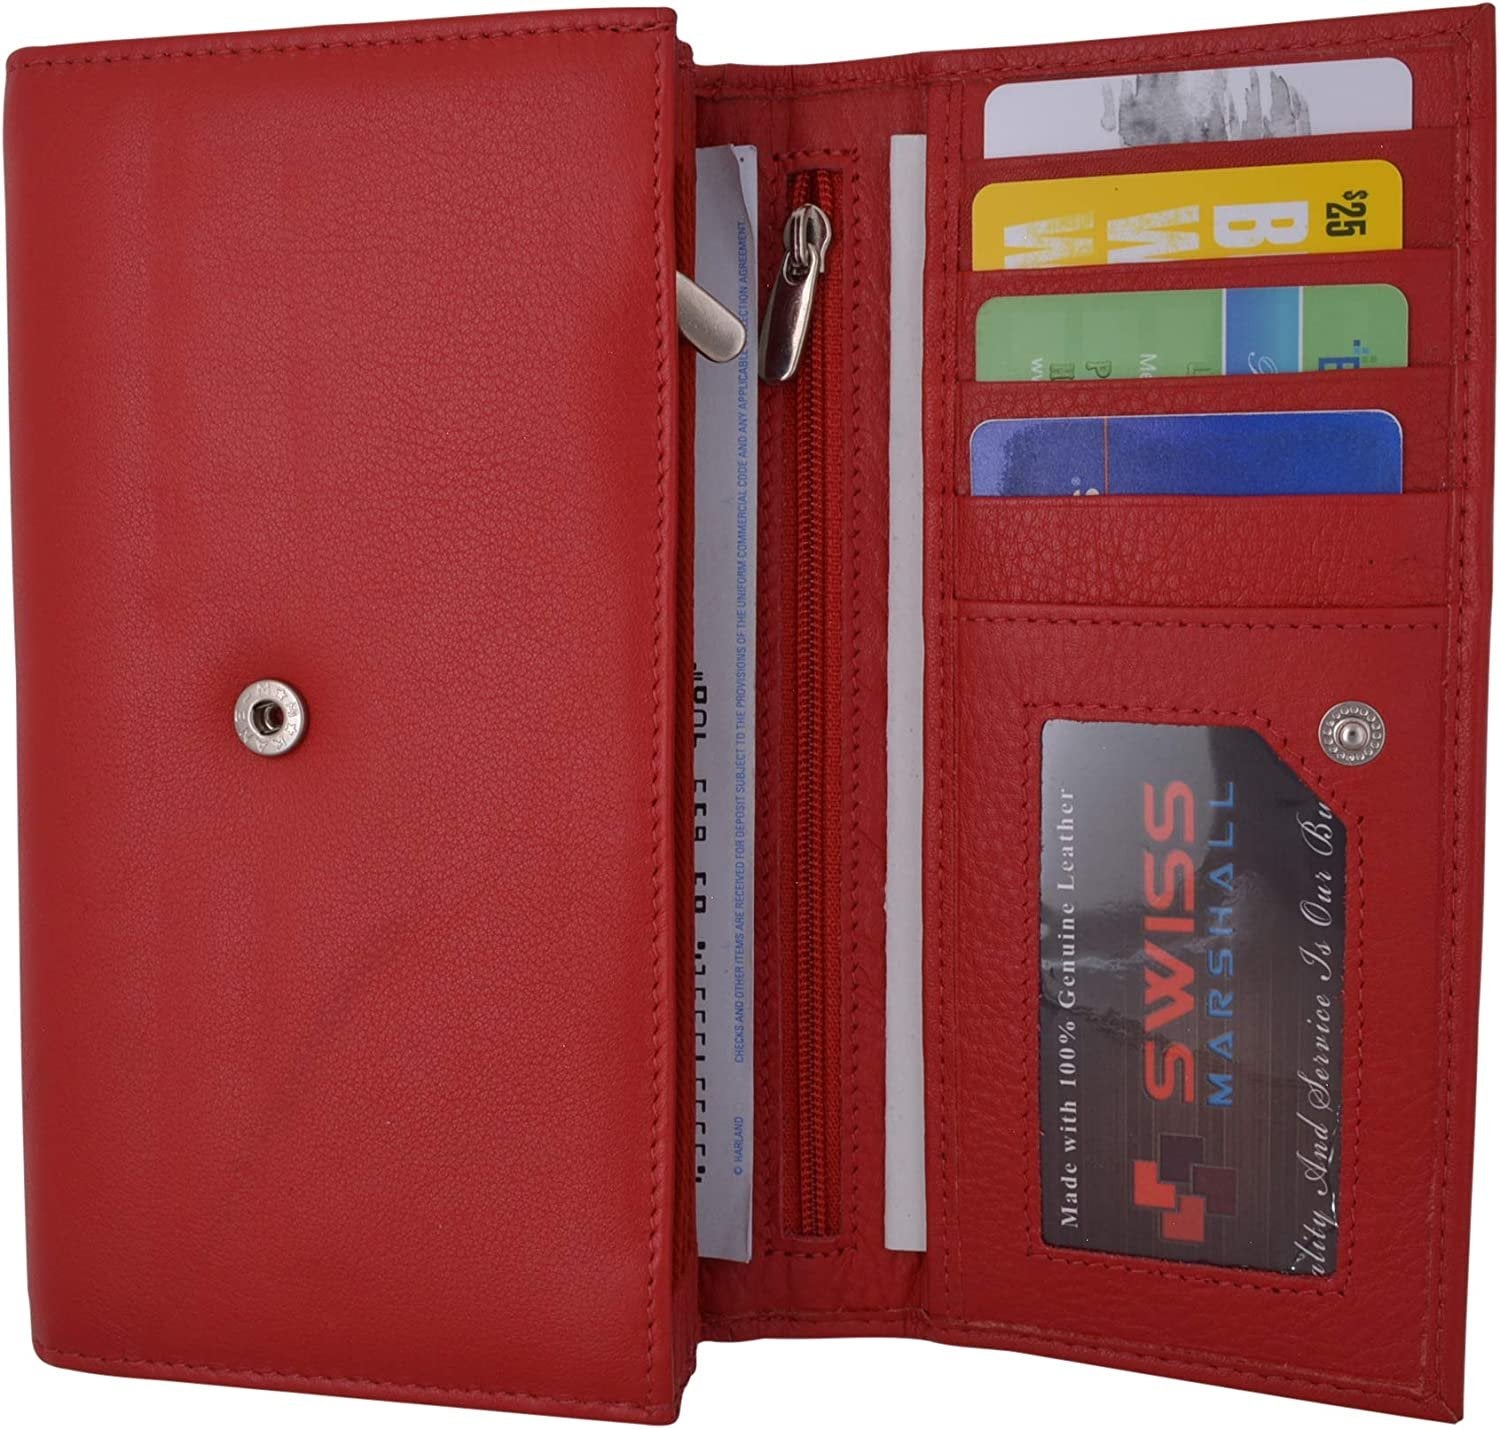 Swiss Marshall Women RFID Blocking Real Leather Wallet - Clutch Checkbook Wallet for Women Red